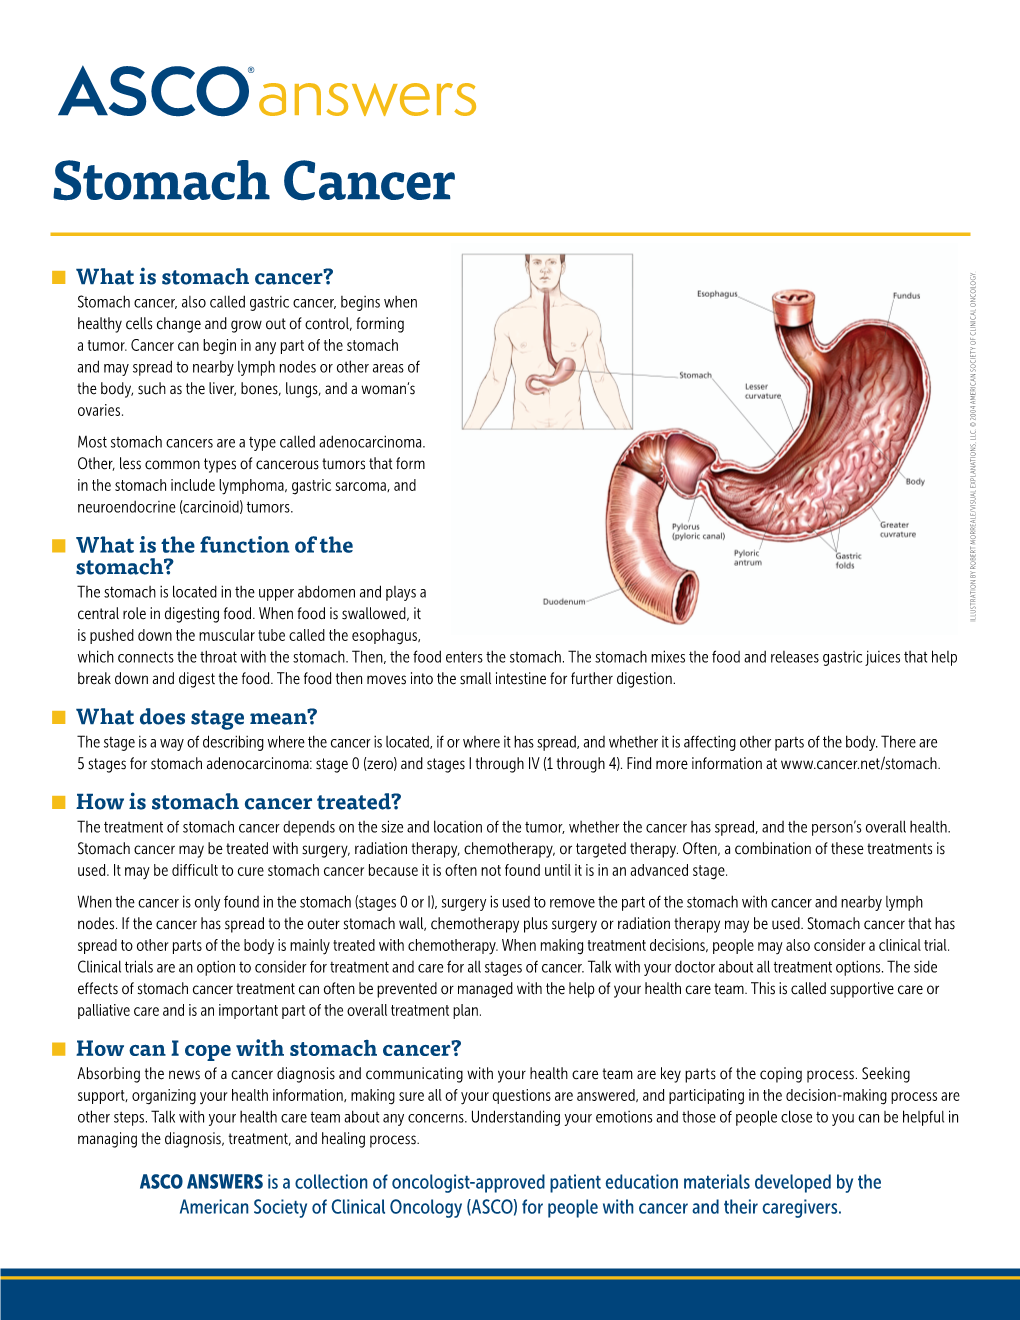 ASCO Answers: Stomach Cancer